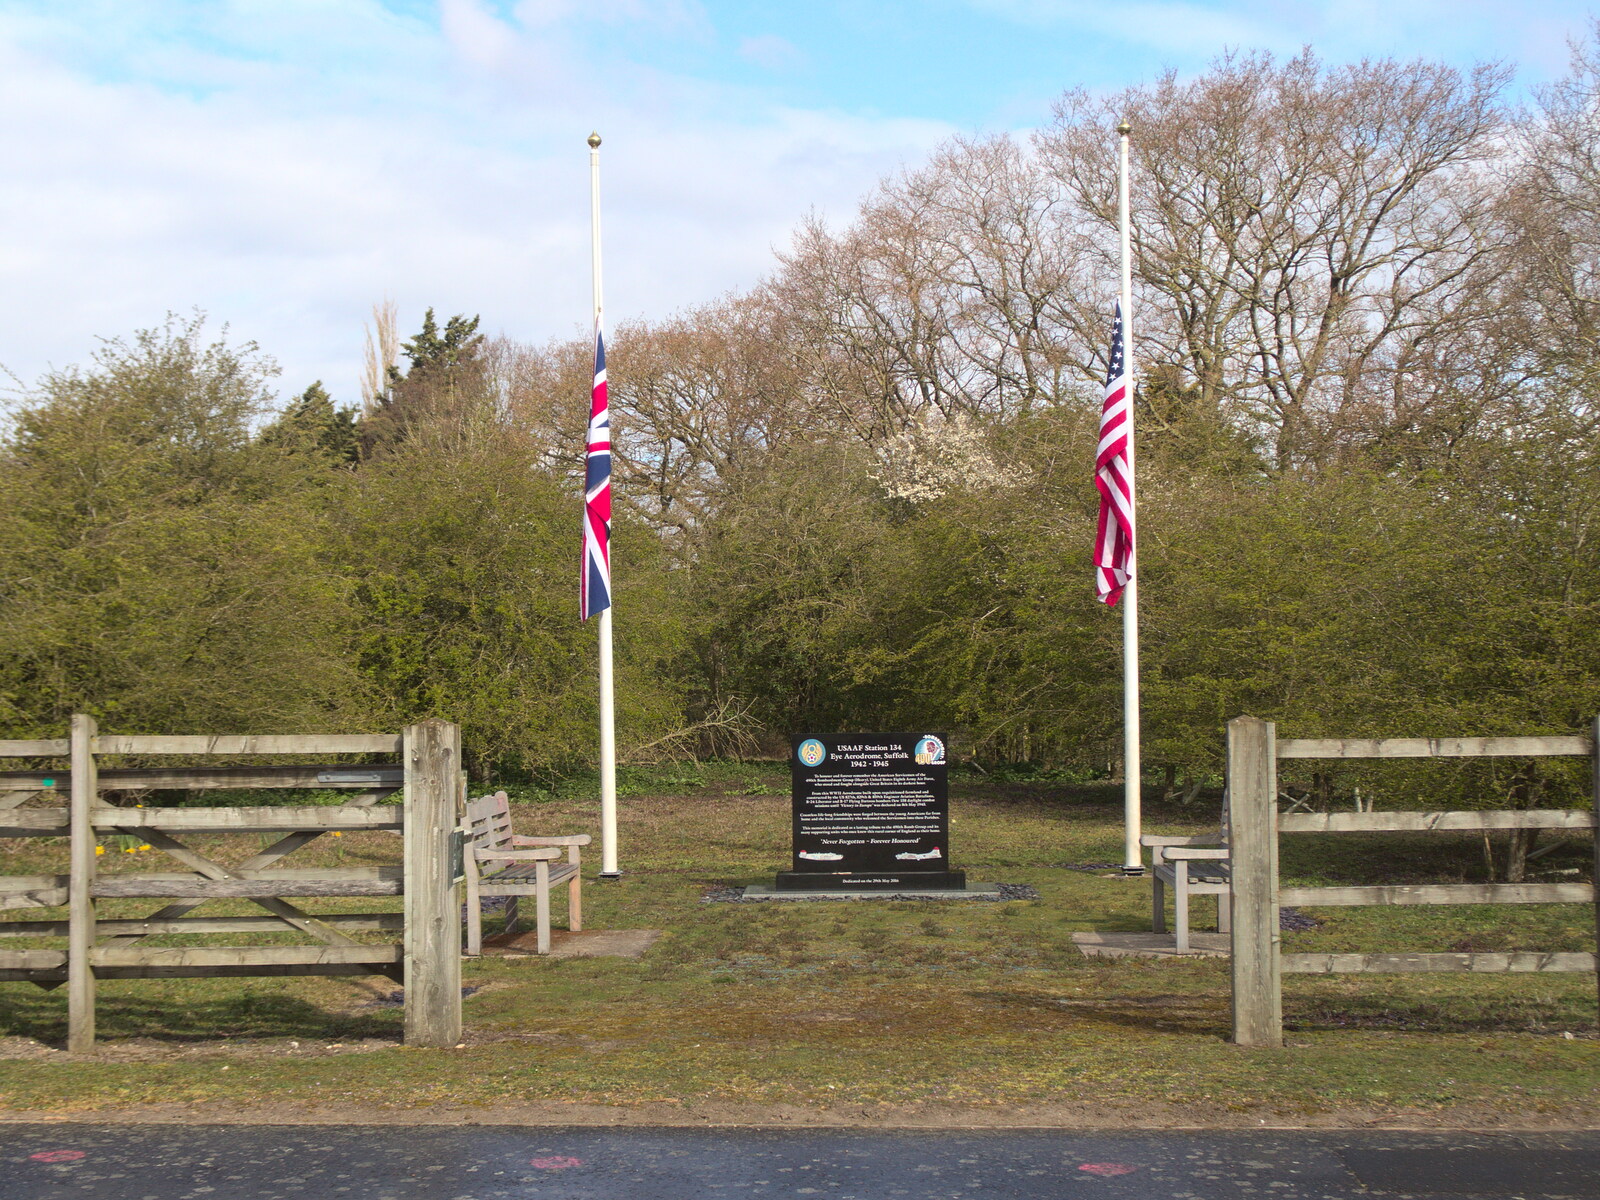 The USAAF Station 134 memorial on Progress Way from Roadworks and Harry's Trampoline, Brome, Suffolk - 6th April 2021